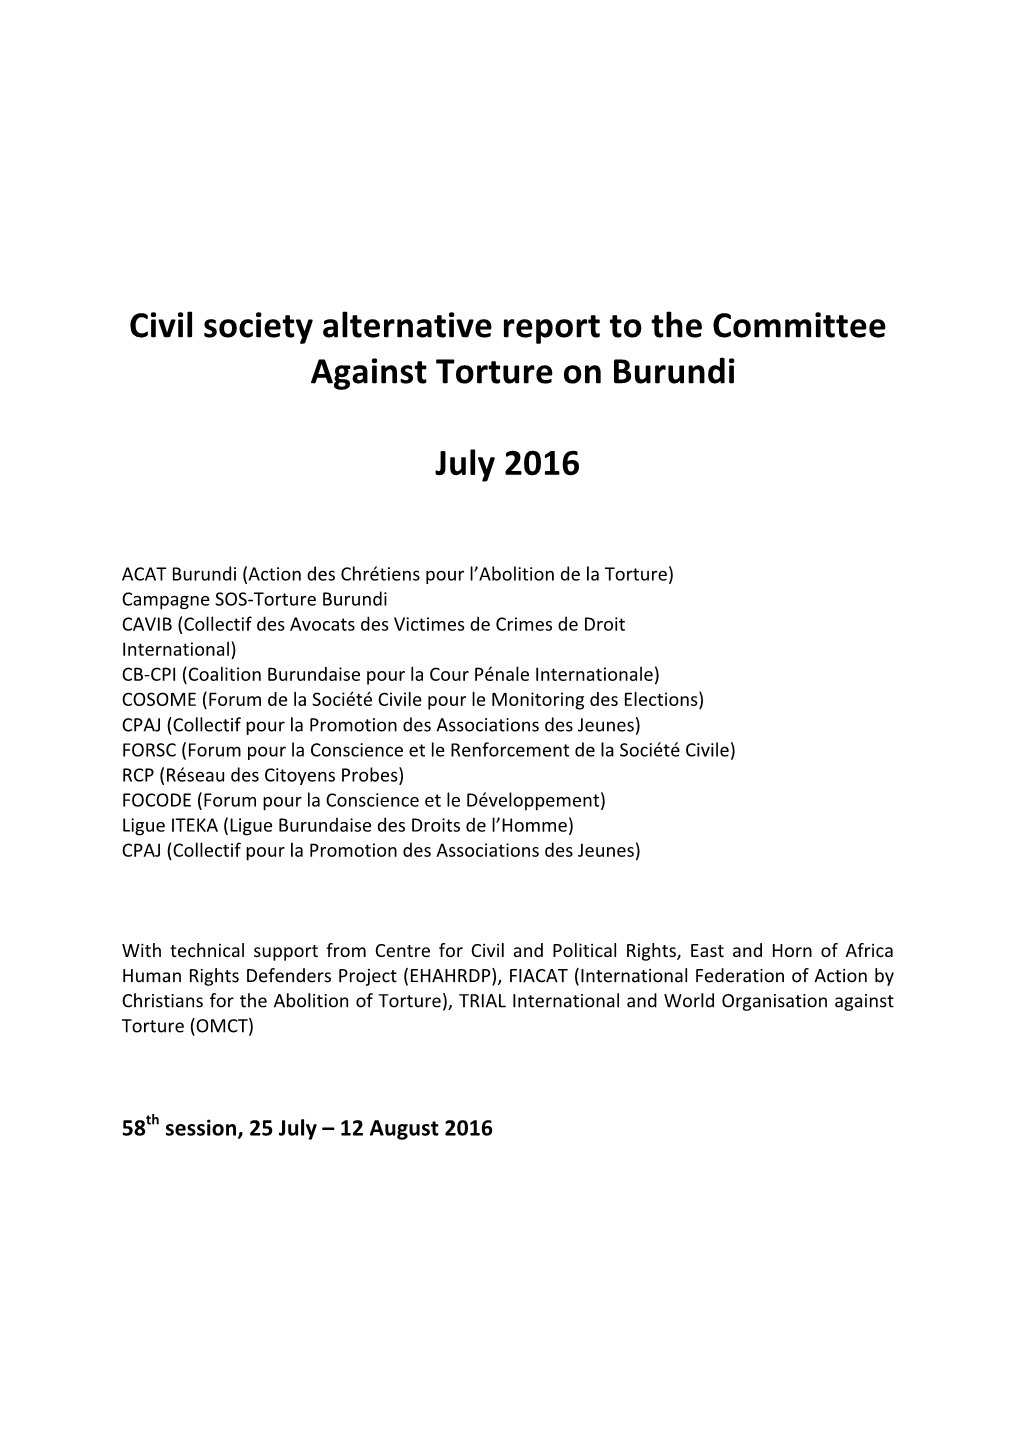 Civil Society Alternative Report to the Committee Against Torture on Burundi July